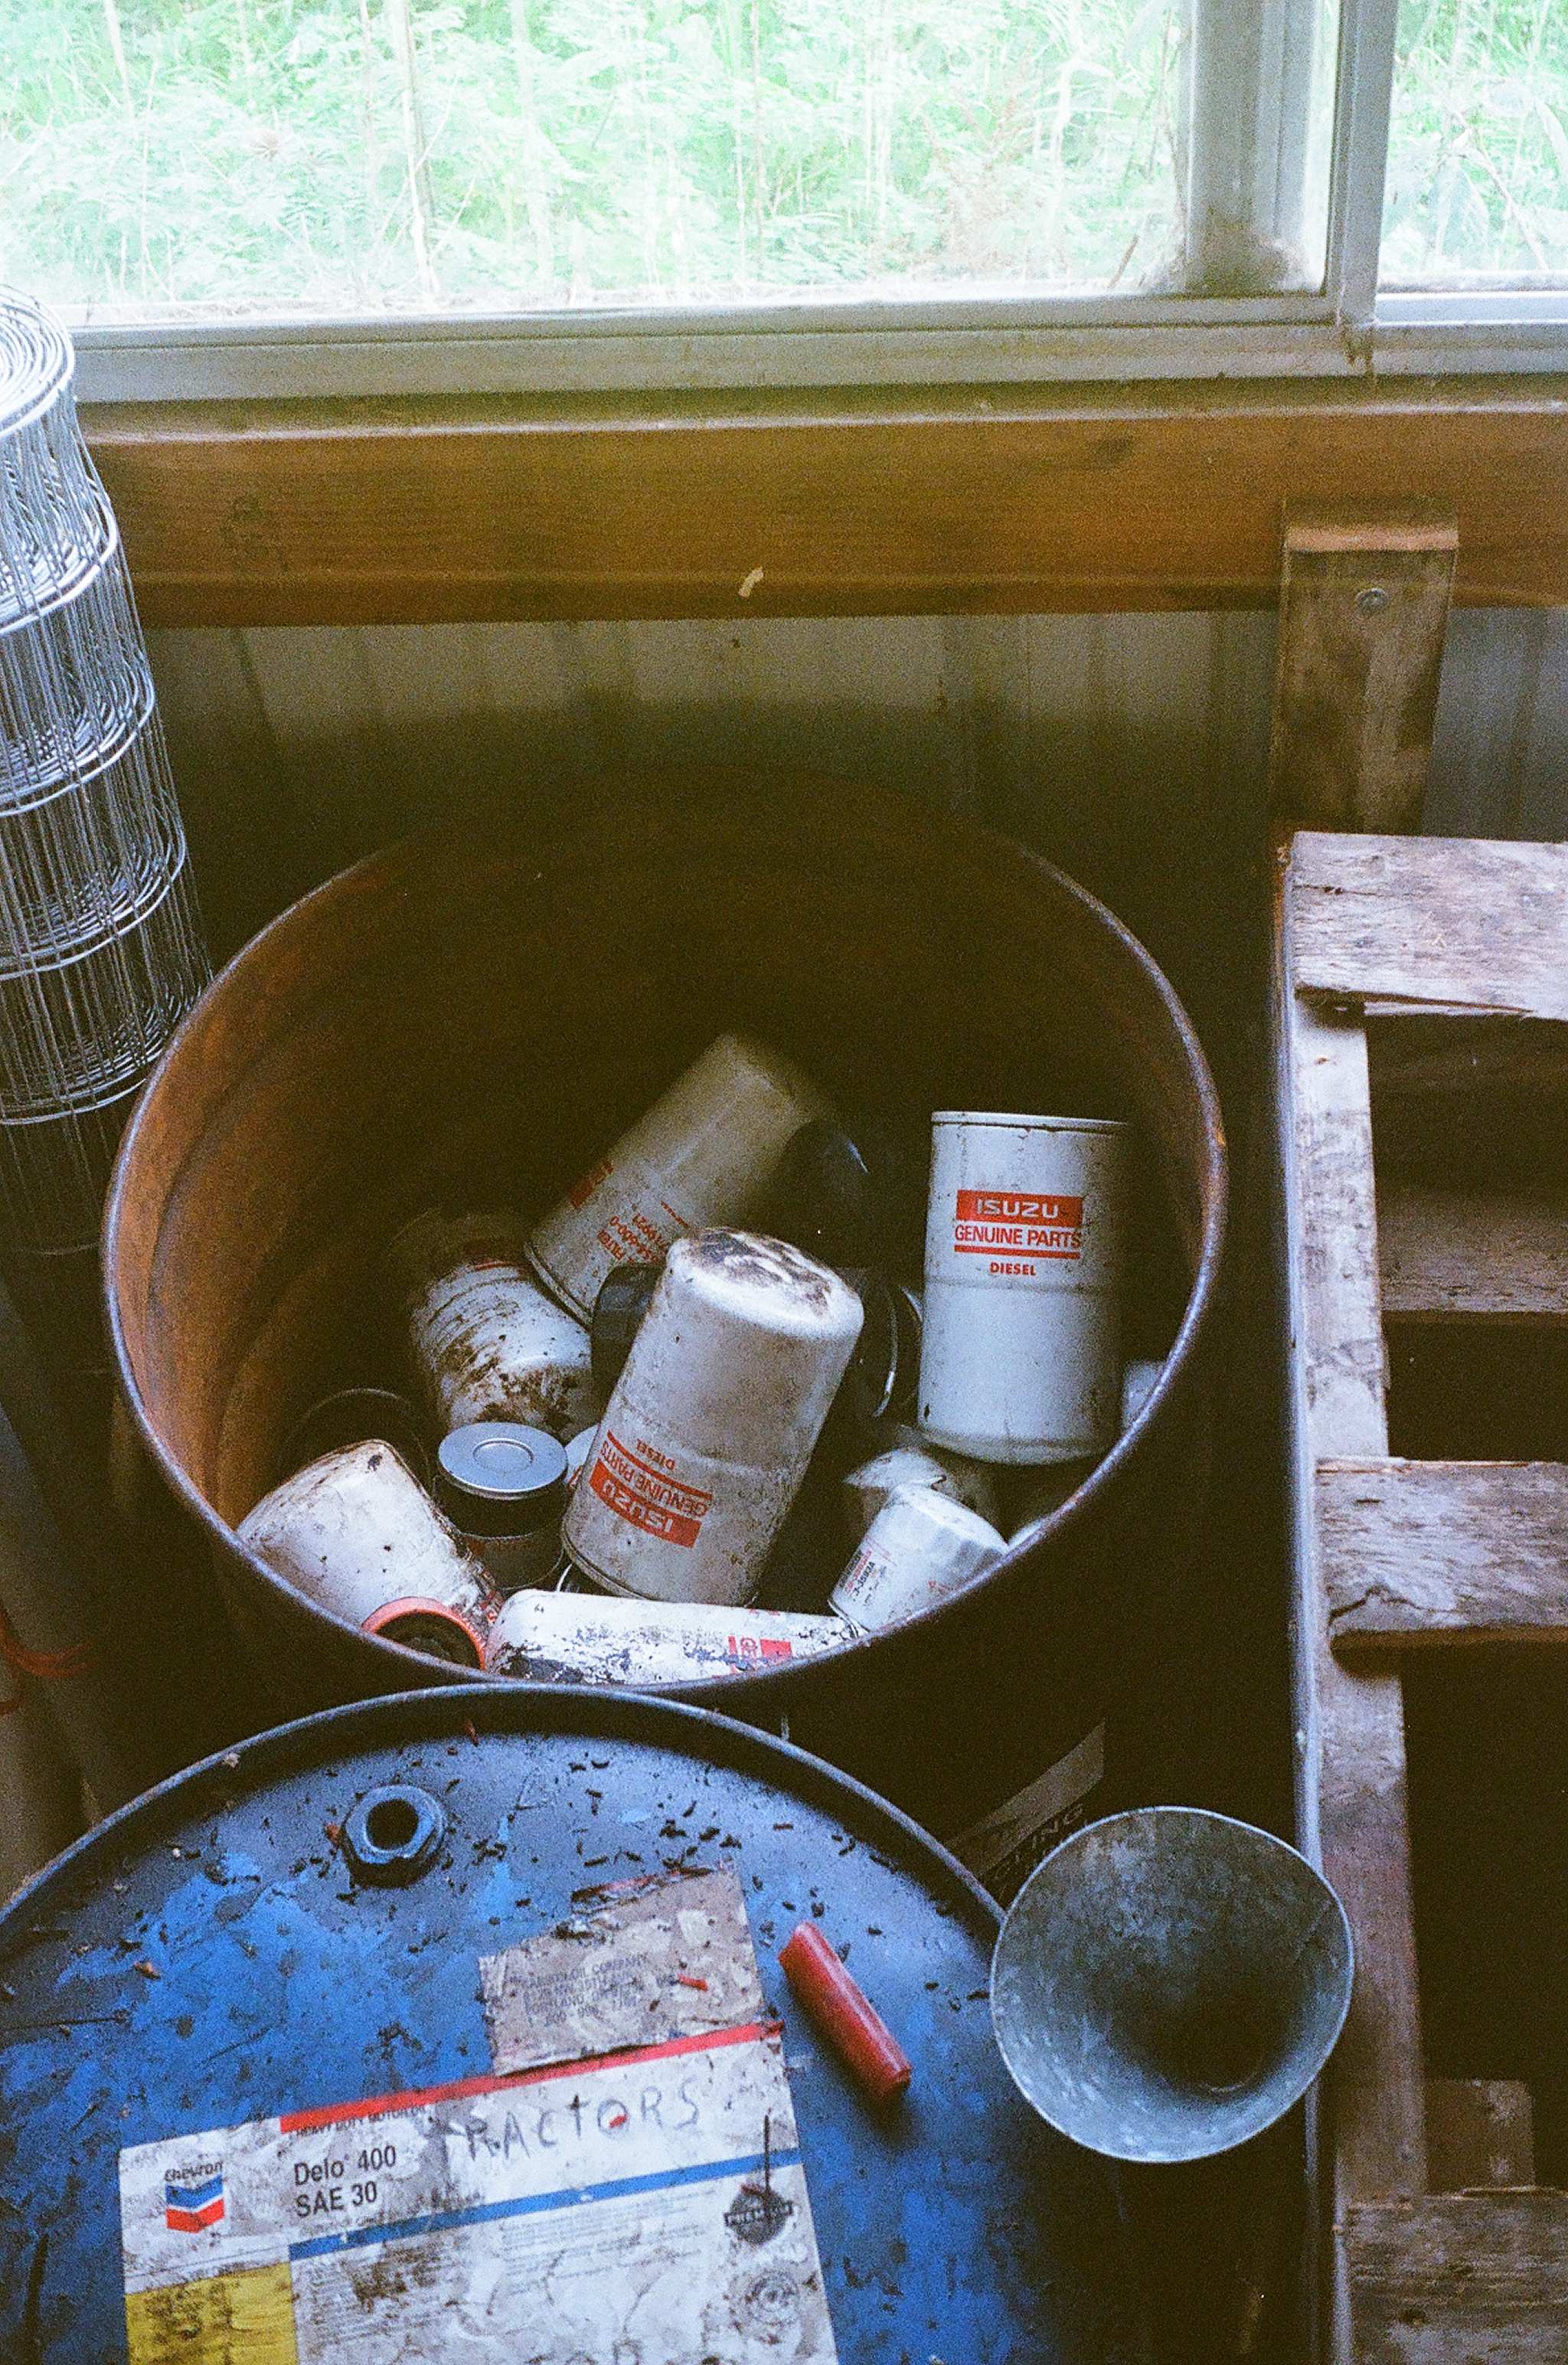  Used oil filters are stored in a barrel before being transported to a Portland company that separates and recycles the steel, paper, and oil in the filters. It takes ten years to fill this barrel! 